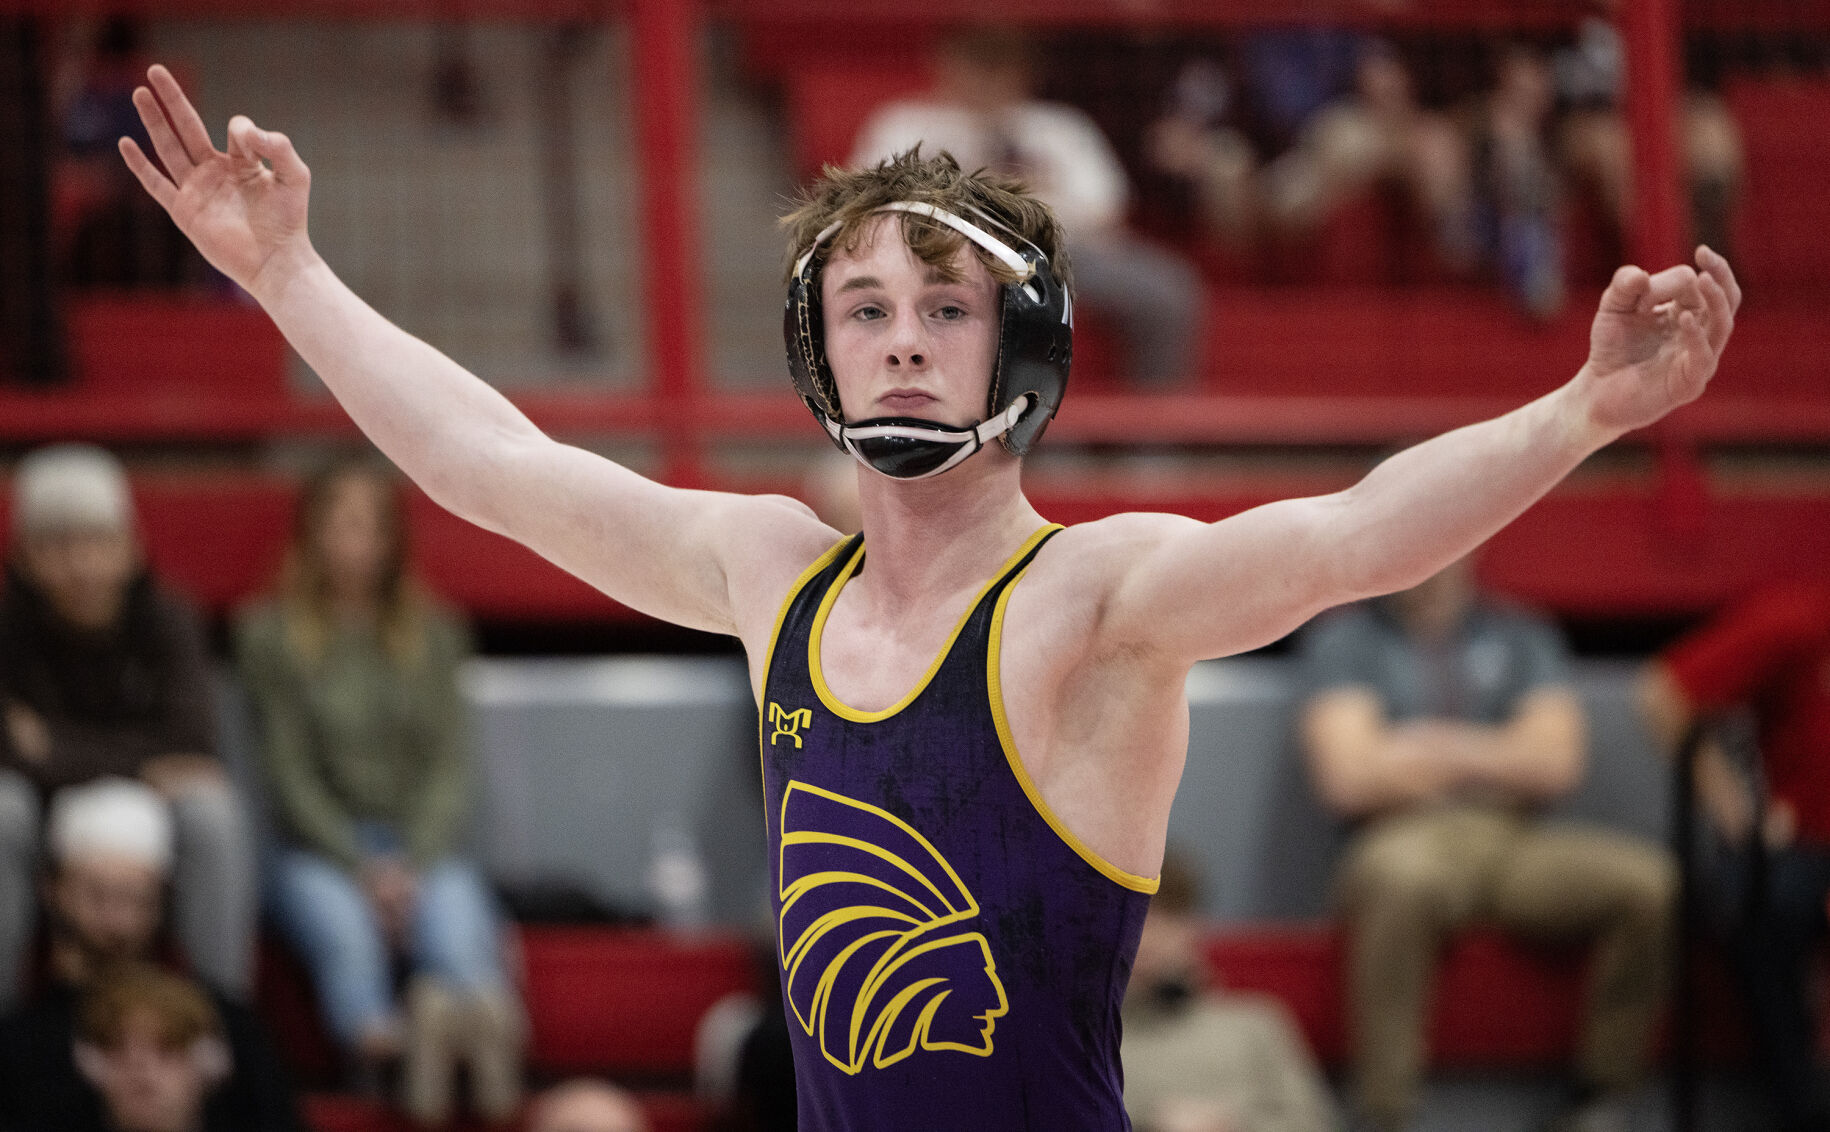 Illinois Boys State Wrestling Tournament: Area Wrestlers Secure Spots in Championship Matches